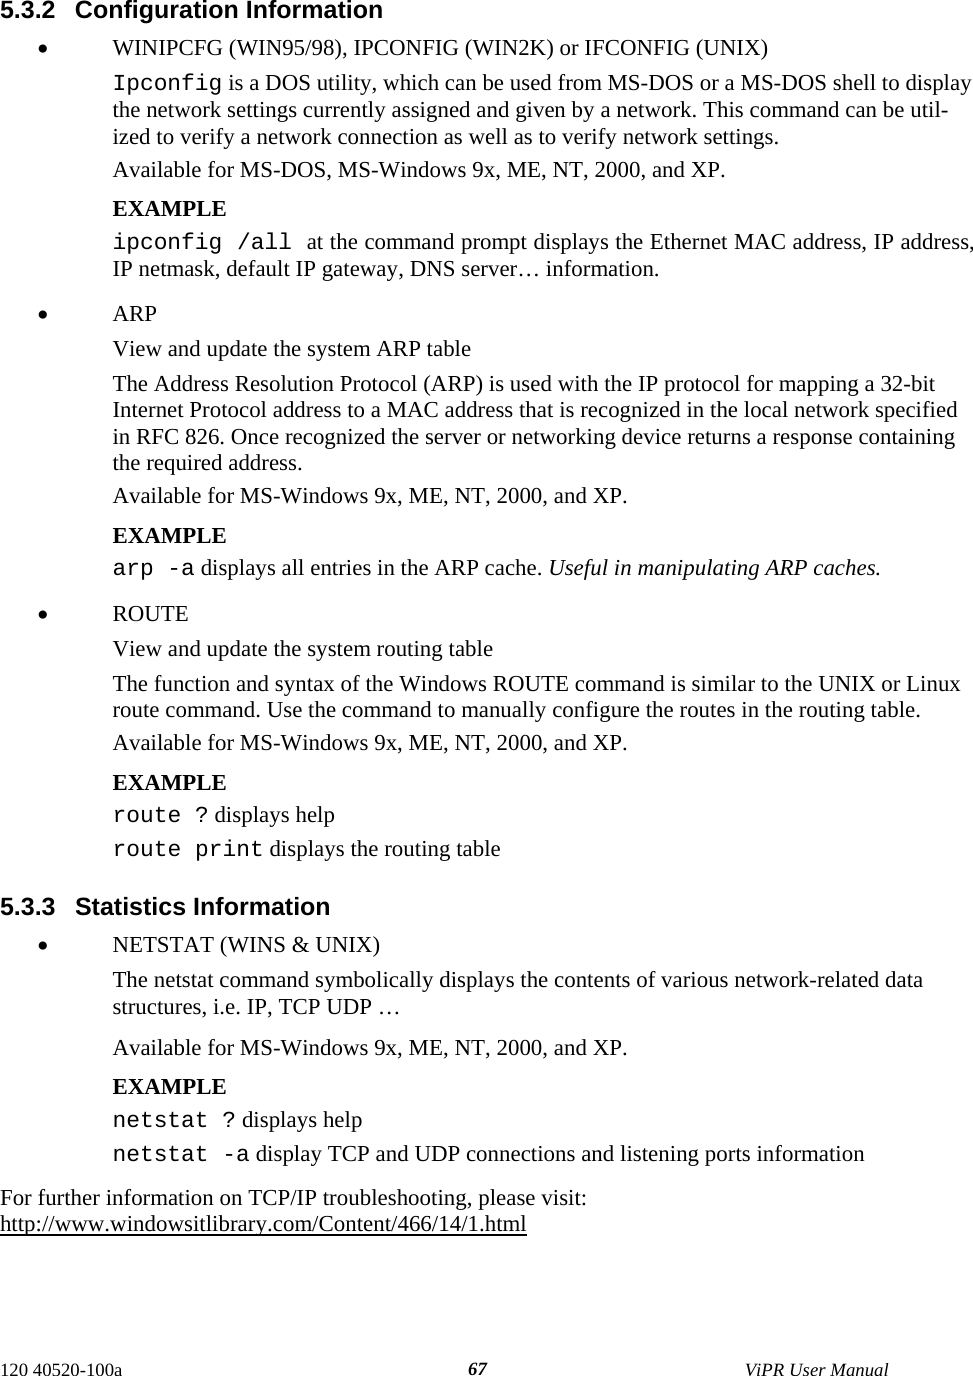  120 40520-100a    ViPR User Manual  675.3.2 Configuration Information •  WINIPCFG (WIN95/98), IPCONFIG (WIN2K) or IFCONFIG (UNIX)  Ipconfig is a DOS utility, which can be used from MS-DOS or a MS-DOS shell to display the network settings currently assigned and given by a network. This command can be util-ized to verify a network connection as well as to verify network settings. Available for MS-DOS, MS-Windows 9x, ME, NT, 2000, and XP. EXAMPLE ipconfig /all at the command prompt displays the Ethernet MAC address, IP address, IP netmask, default IP gateway, DNS server… information. •  ARP  View and update the system ARP table The Address Resolution Protocol (ARP) is used with the IP protocol for mapping a 32-bit Internet Protocol address to a MAC address that is recognized in the local network specified in RFC 826. Once recognized the server or networking device returns a response containing the required address. Available for MS-Windows 9x, ME, NT, 2000, and XP. EXAMPLE arp -a displays all entries in the ARP cache. Useful in manipulating ARP caches. •  ROUTE  View and update the system routing table The function and syntax of the Windows ROUTE command is similar to the UNIX or Linux route command. Use the command to manually configure the routes in the routing table. Available for MS-Windows 9x, ME, NT, 2000, and XP. EXAMPLE  route ? displays help route print displays the routing table  5.3.3 Statistics Information •  NETSTAT (WINS &amp; UNIX)  The netstat command symbolically displays the contents of various network-related data structures, i.e. IP, TCP UDP … Available for MS-Windows 9x, ME, NT, 2000, and XP. EXAMPLE  netstat ? displays help netstat -a display TCP and UDP connections and listening ports information  For further information on TCP/IP troubleshooting, please visit: http://www.windowsitlibrary.com/Content/466/14/1.html 